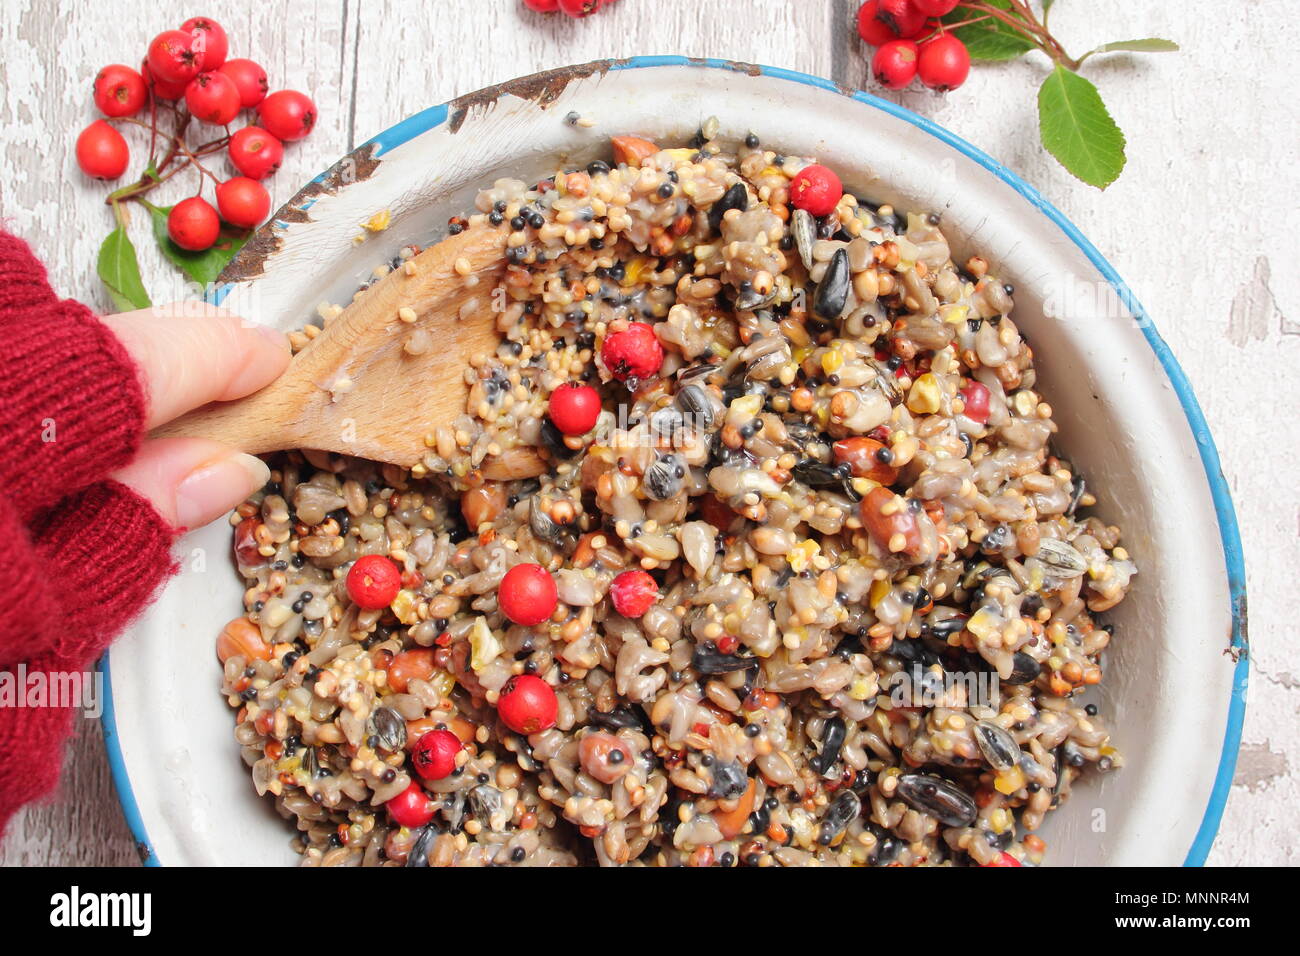 Step by step 2/7: Making winter berry bird feeders with cookie cutters.Mix nuts, seeds and berries with melted fat. Stir well to ensure fat covers all. Stock Photo